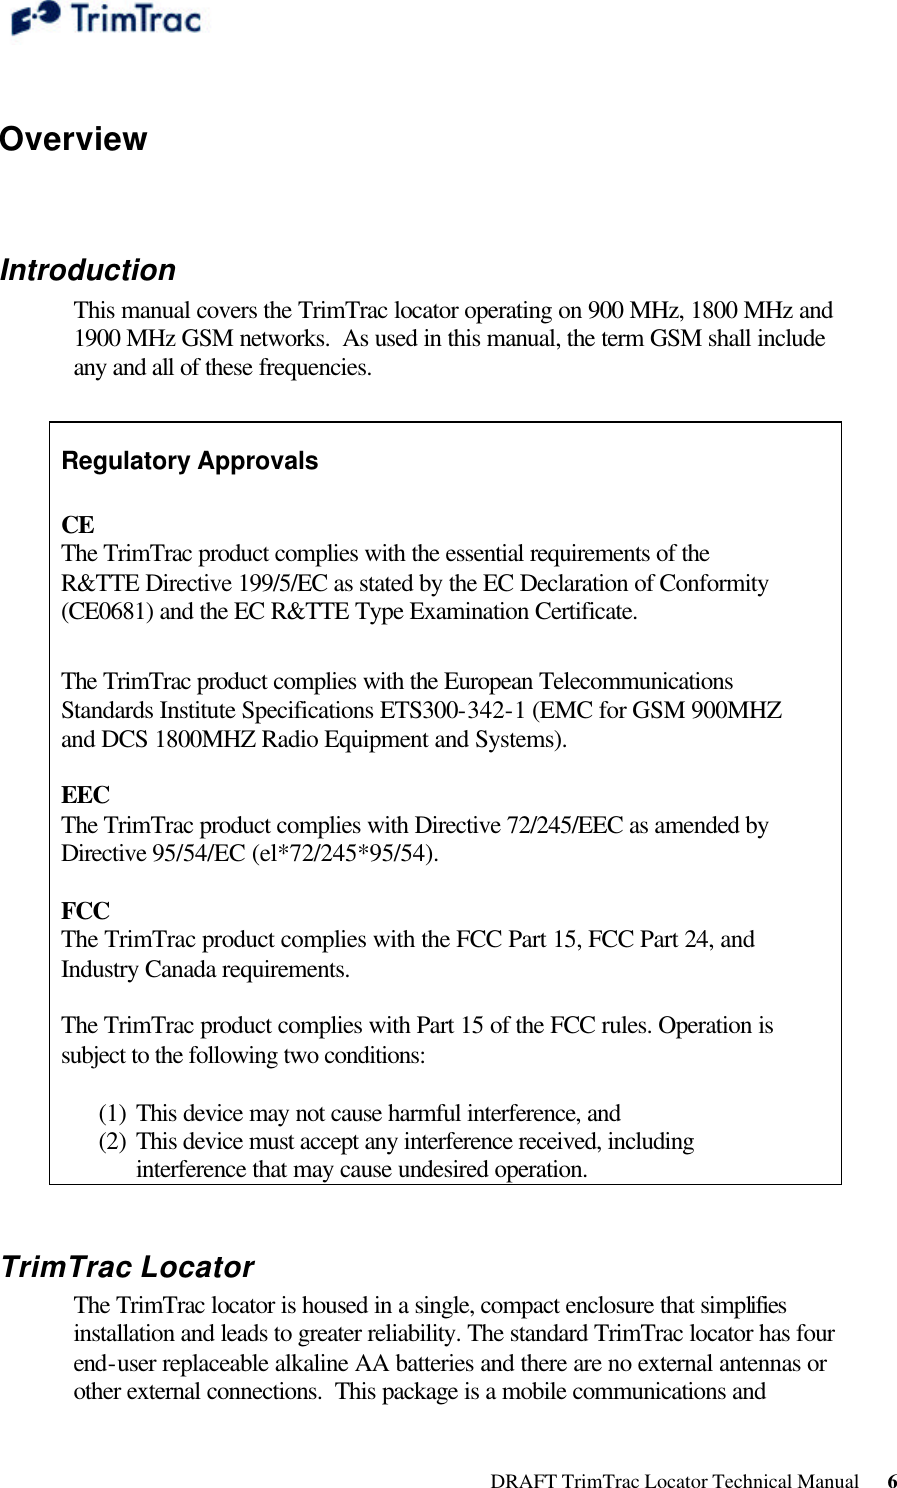  DRAFT TrimTrac Locator Technical Manual      6  Overview  Introduction This manual covers the TrimTrac locator operating on 900 MHz, 1800 MHz and 1900 MHz GSM networks.  As used in this manual, the term GSM shall include any and all of these frequencies.  Regulatory Approvals  CE  The TrimTrac product complies with the essential requirements of the R&amp;TTE Directive 199/5/EC as stated by the EC Declaration of Conformity (CE0681) and the EC R&amp;TTE Type Examination Certificate.   The TrimTrac product complies with the European Telecommunications Standards Institute Specifications ETS300-342-1 (EMC for GSM 900MHZ and DCS 1800MHZ Radio Equipment and Systems).   EEC  The TrimTrac product complies with Directive 72/245/EEC as amended by Directive 95/54/EC (el*72/245*95/54). 1.1.2   FCC  The TrimTrac product complies with the FCC Part 15, FCC Part 24, and Industry Canada requirements.   The TrimTrac product complies with Part 15 of the FCC rules. Operation is subject to the following two conditions:   (1) This device may not cause harmful interference, and  (2) This device must accept any interference received, including interference that may cause undesired operation.  TrimTrac Locator The TrimTrac locator is housed in a single, compact enclosure that simplifies installation and leads to greater reliability. The standard TrimTrac locator has four end-user replaceable alkaline AA batteries and there are no external antennas or other external connections.  This package is a mobile communications and 